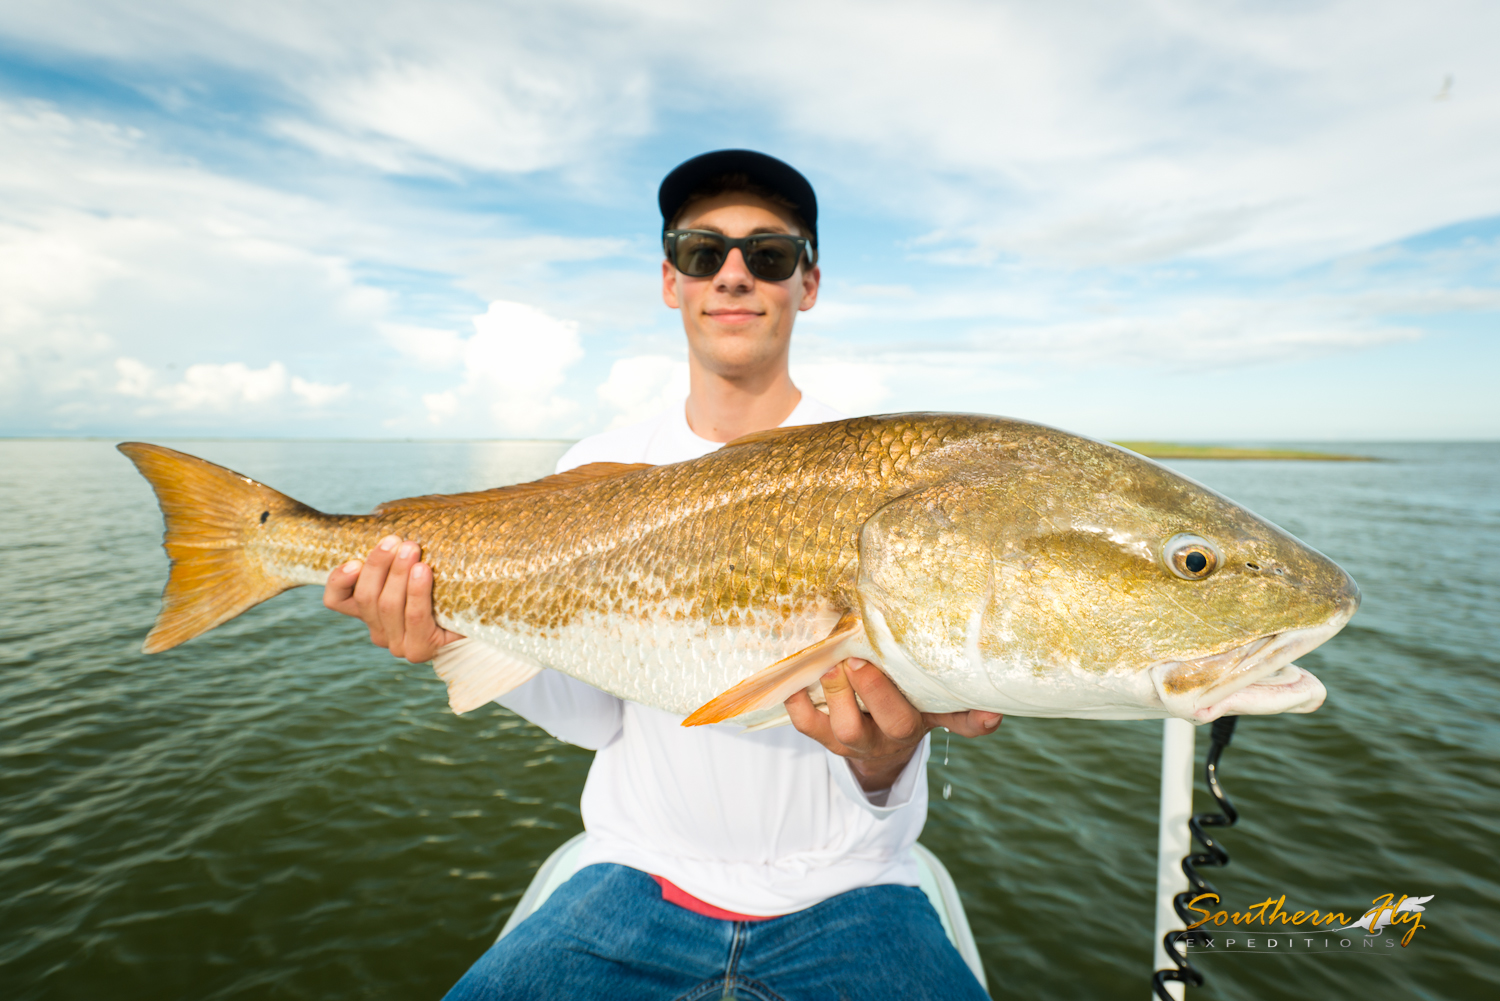 fly fishing new orleans and louisiana redfish guide Southern Fly Expeditions - Louisiana's best fly fishing guide 